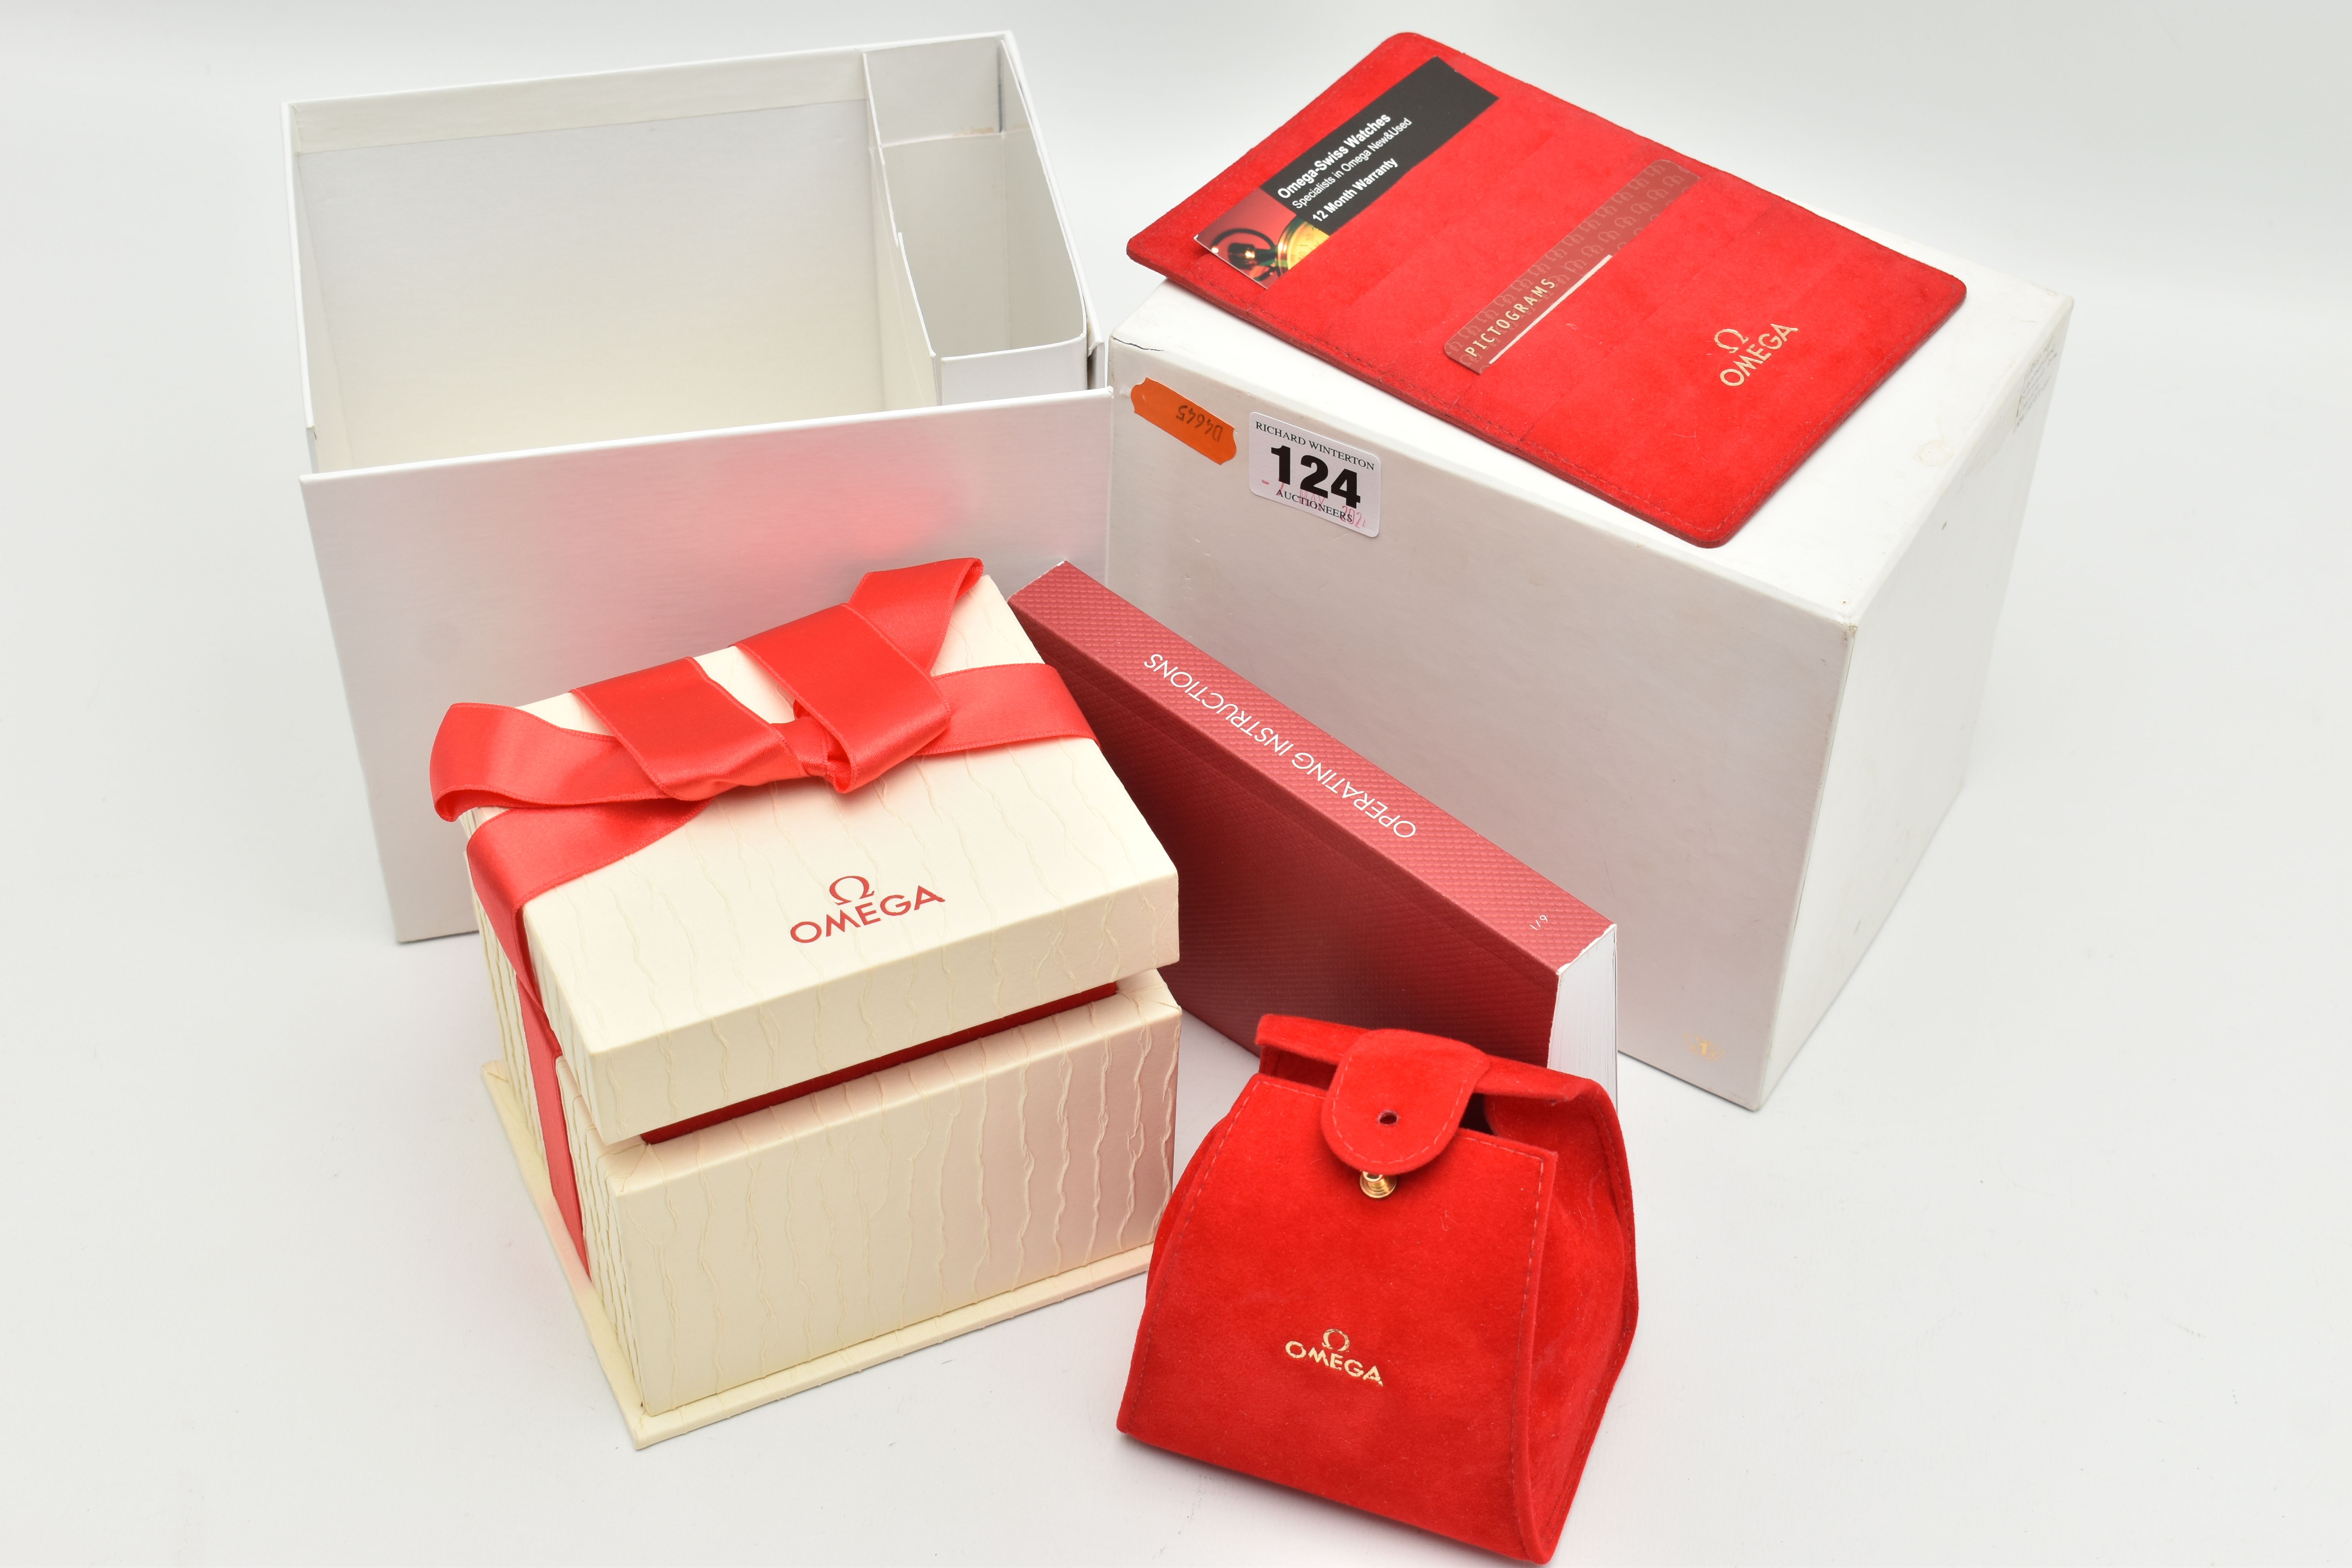 AN 'OMEGA' WATCH BOX, textured box with red ribbon detail, travel pouch interior, also including a - Image 3 of 4